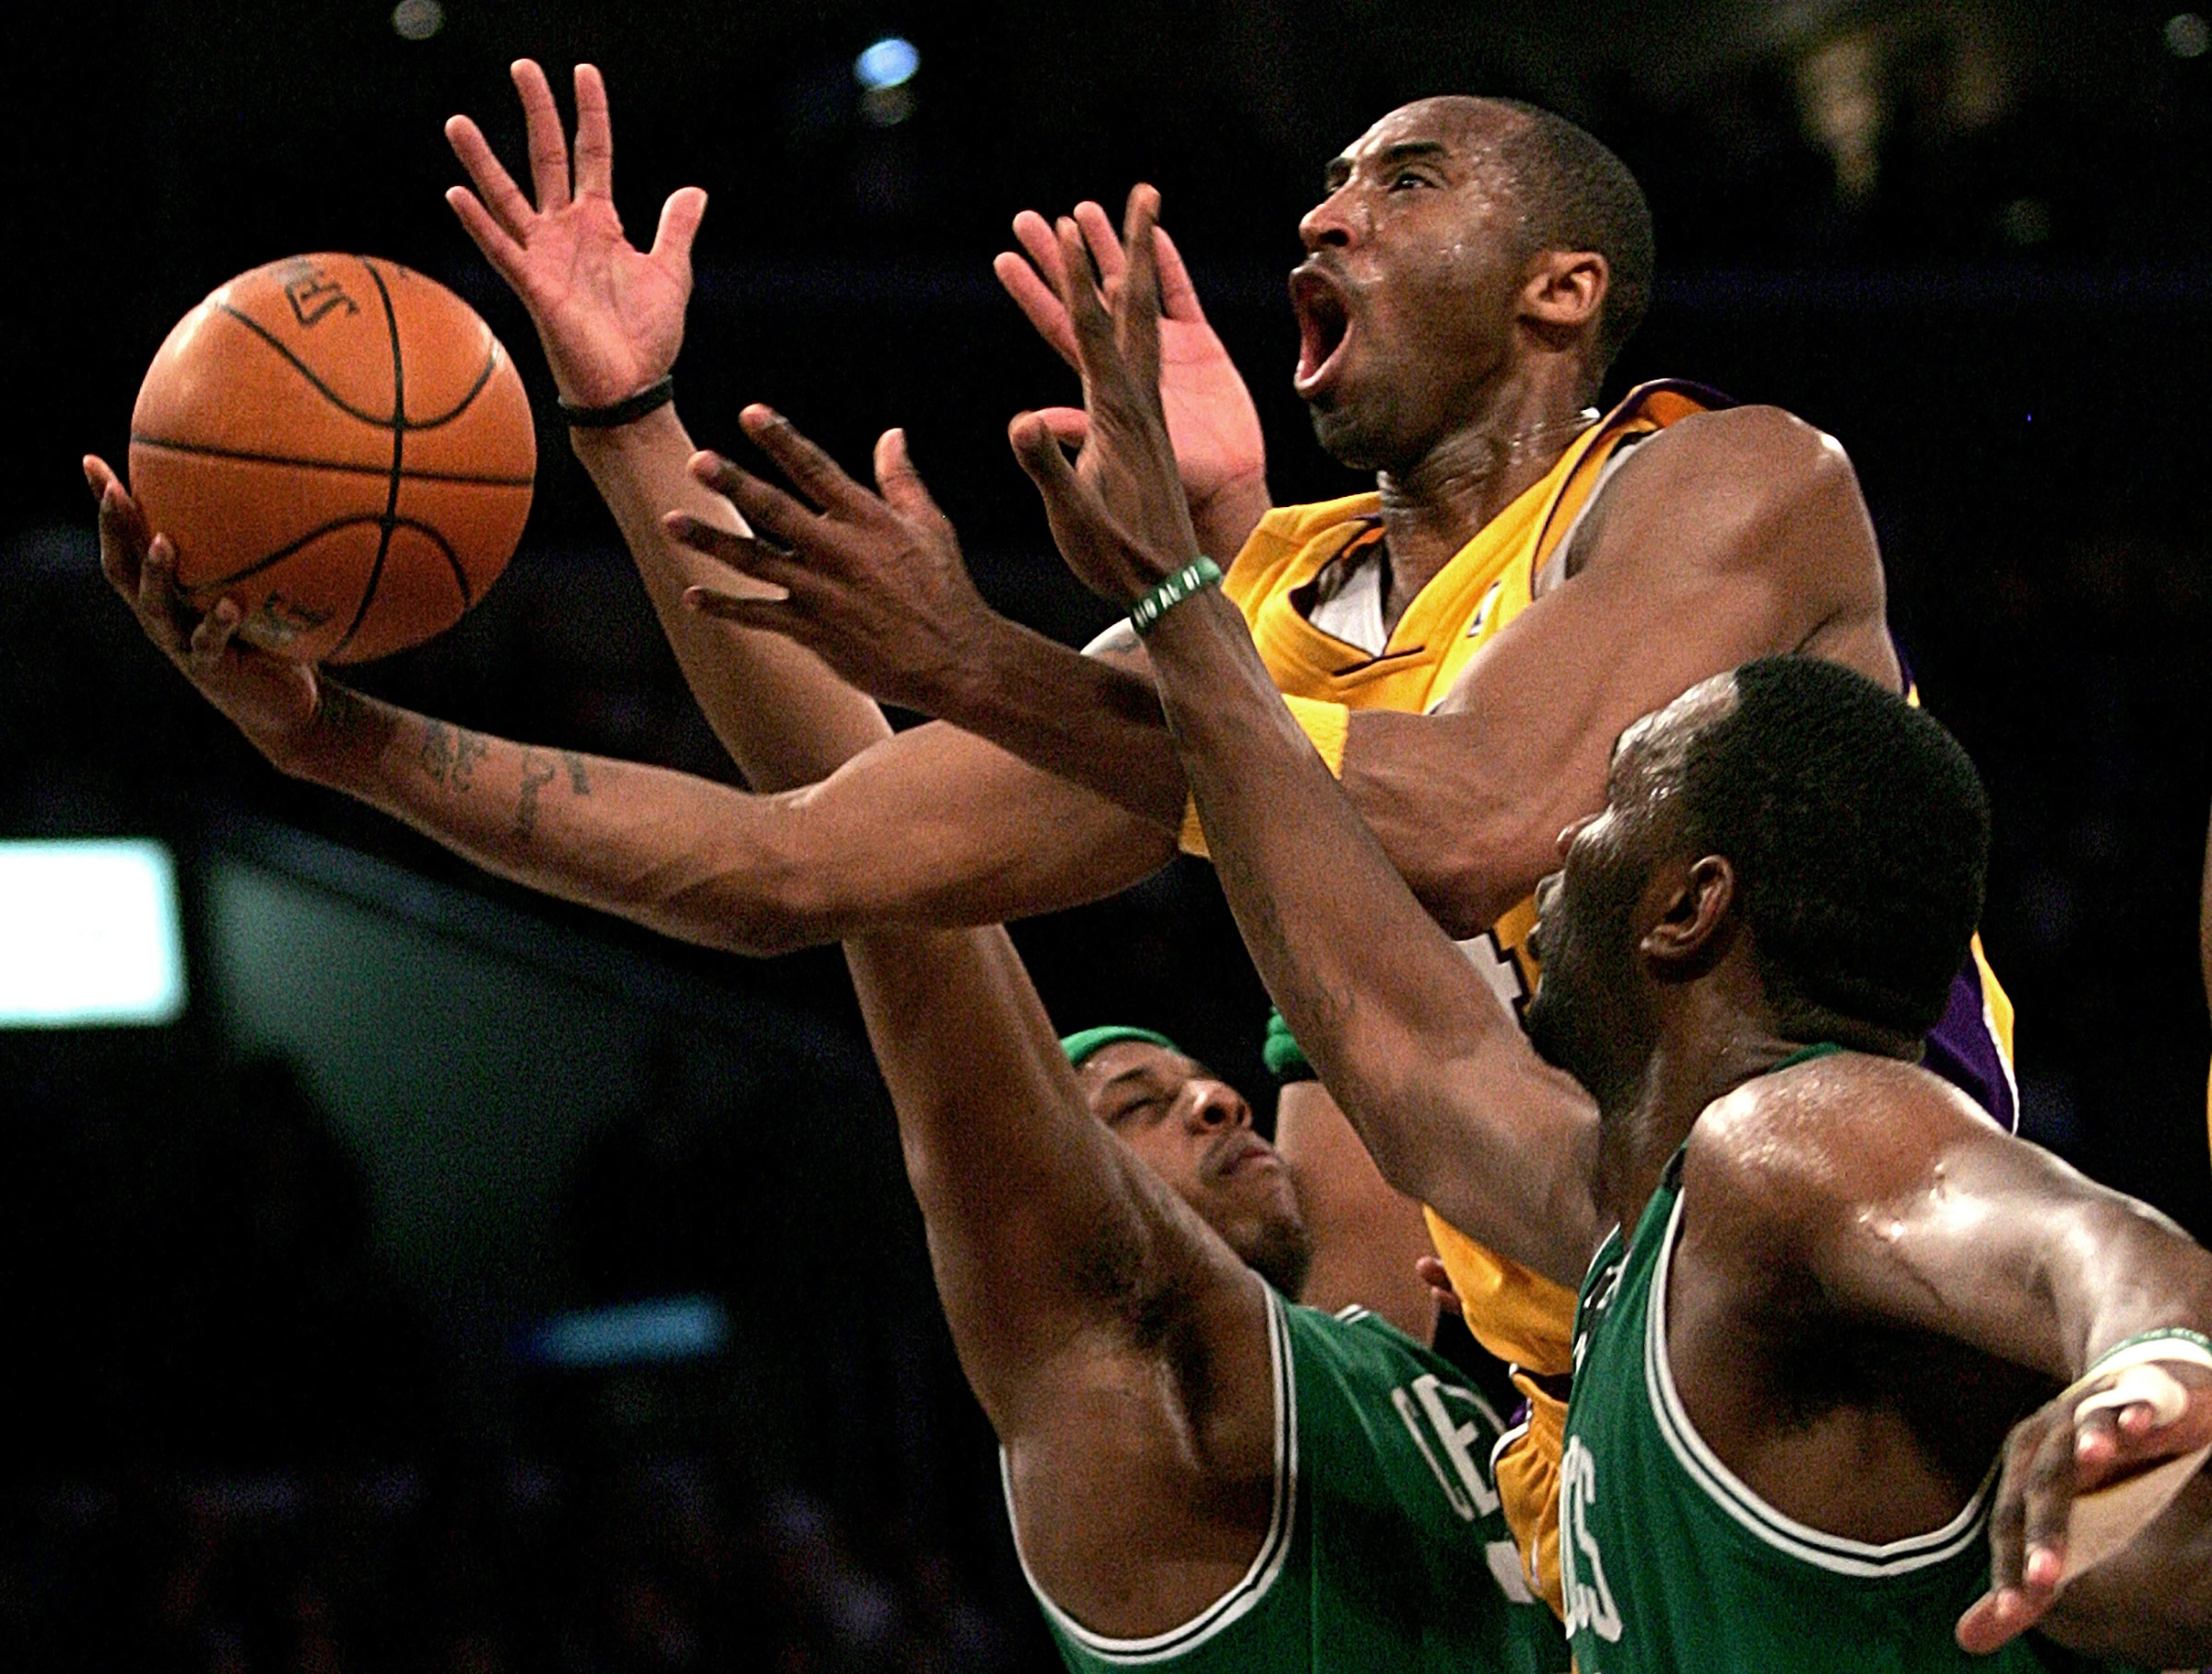 Kobe Bryant goes up for a shot between the Boston Celtics' Paul Pierce and Al Jefferson during an NBA basketball game in Los Angeles on Feb. 23, 2006. (Branimir Kvartuc—AP)